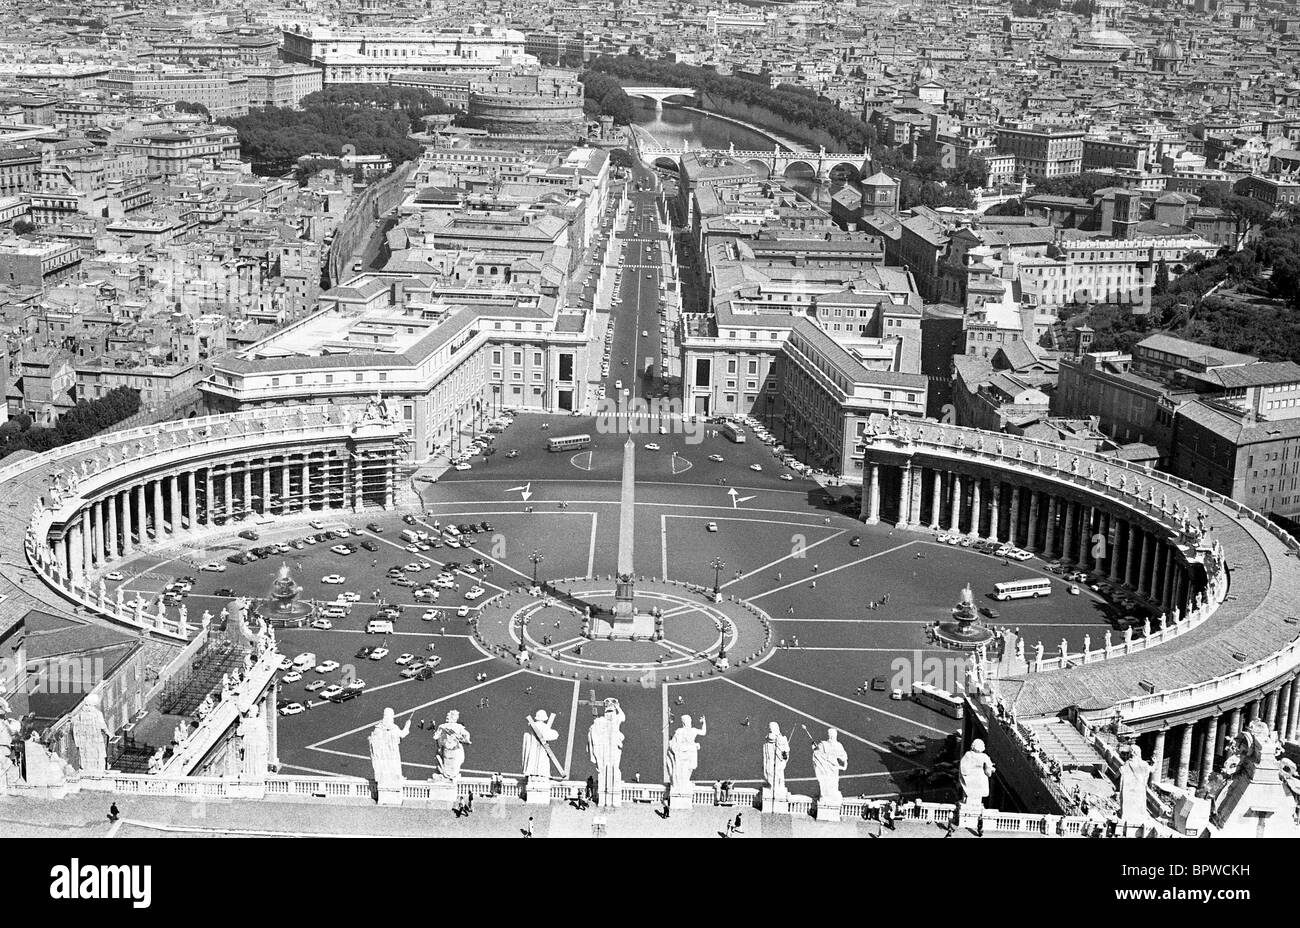 The city of Rome in Italy from the roof of St Peters in 1968 Rome city basilica 1960s historic Italy Italian Picture by David Bagnall Stock Photo